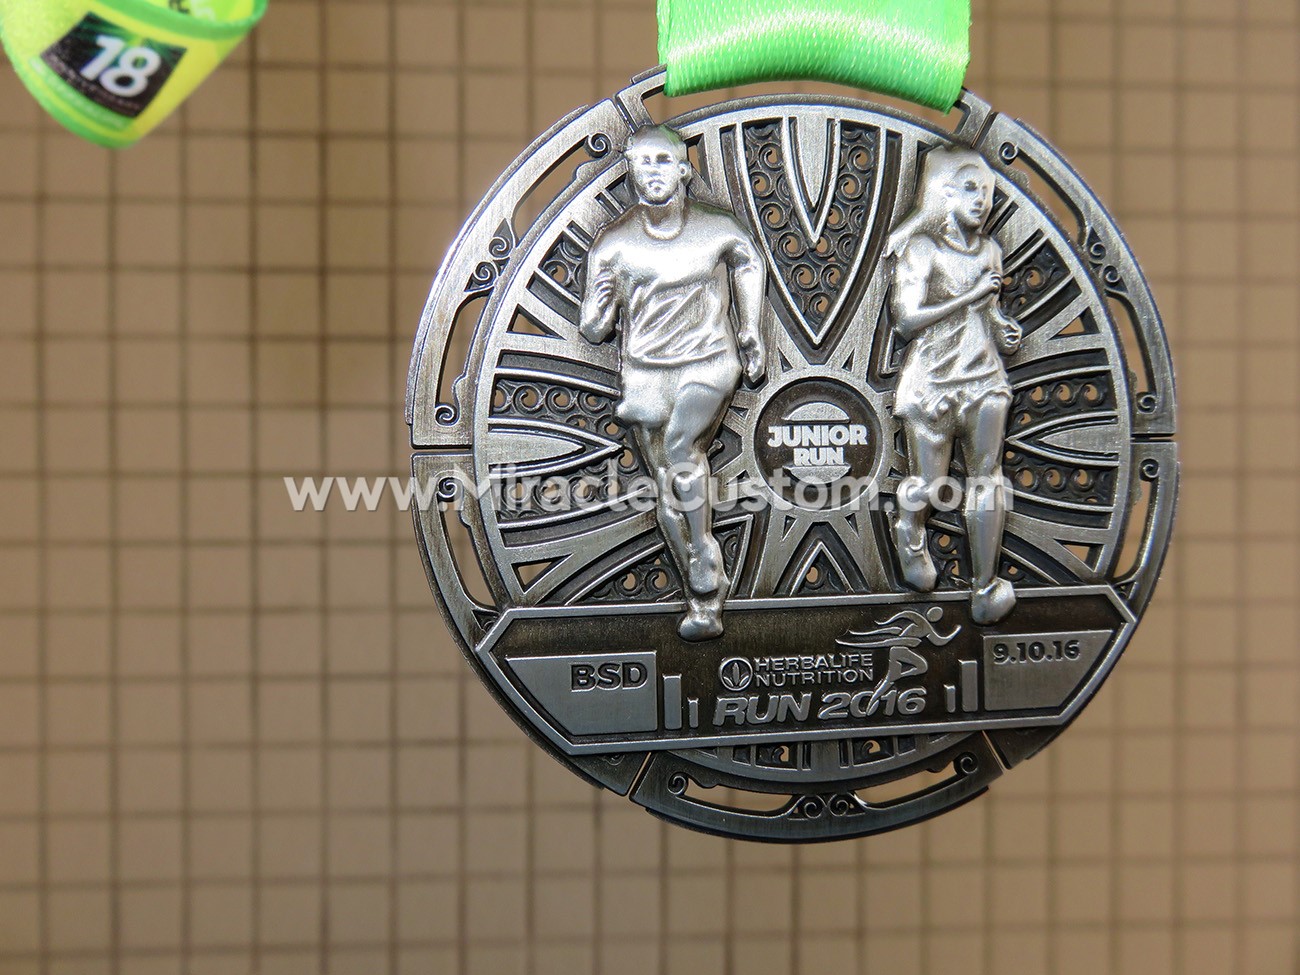 Custom Cut Out Race Medals